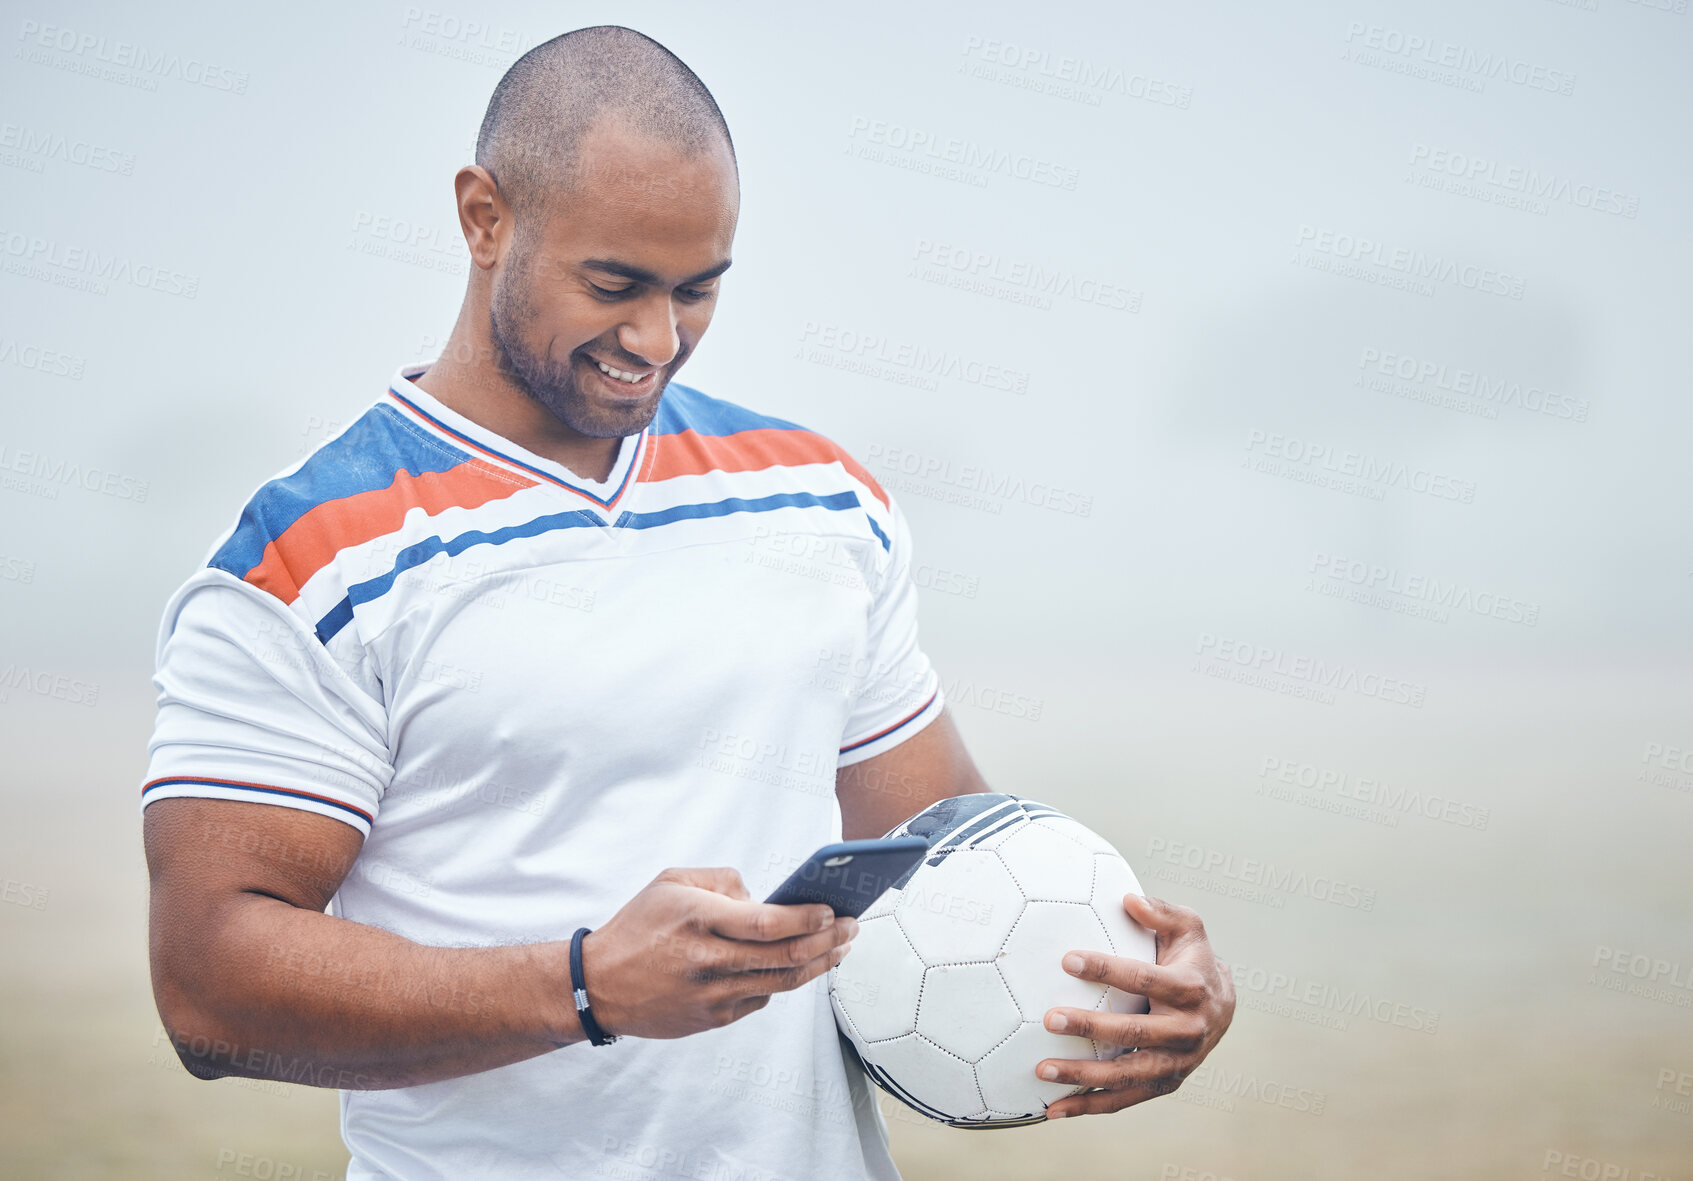 Buy stock photo Shot of a young male soccer player using his smartphone to send a text while holding the ball